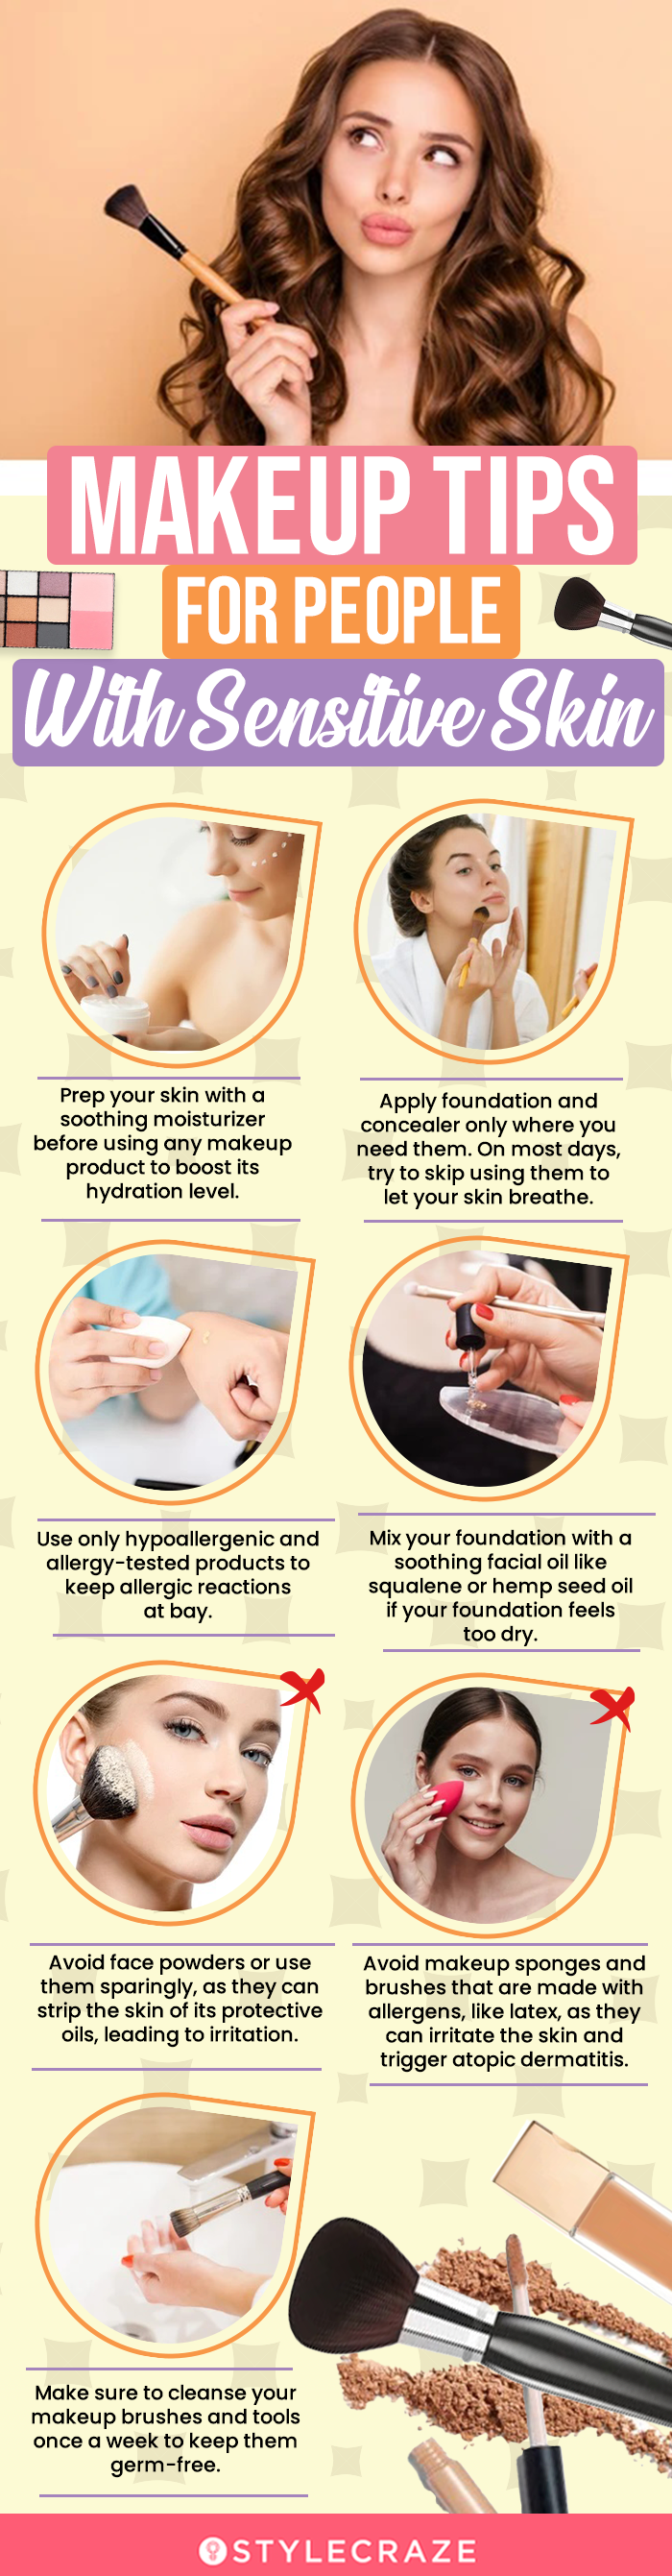 Makeup Tips for People With Sensitive Skin (infographic)